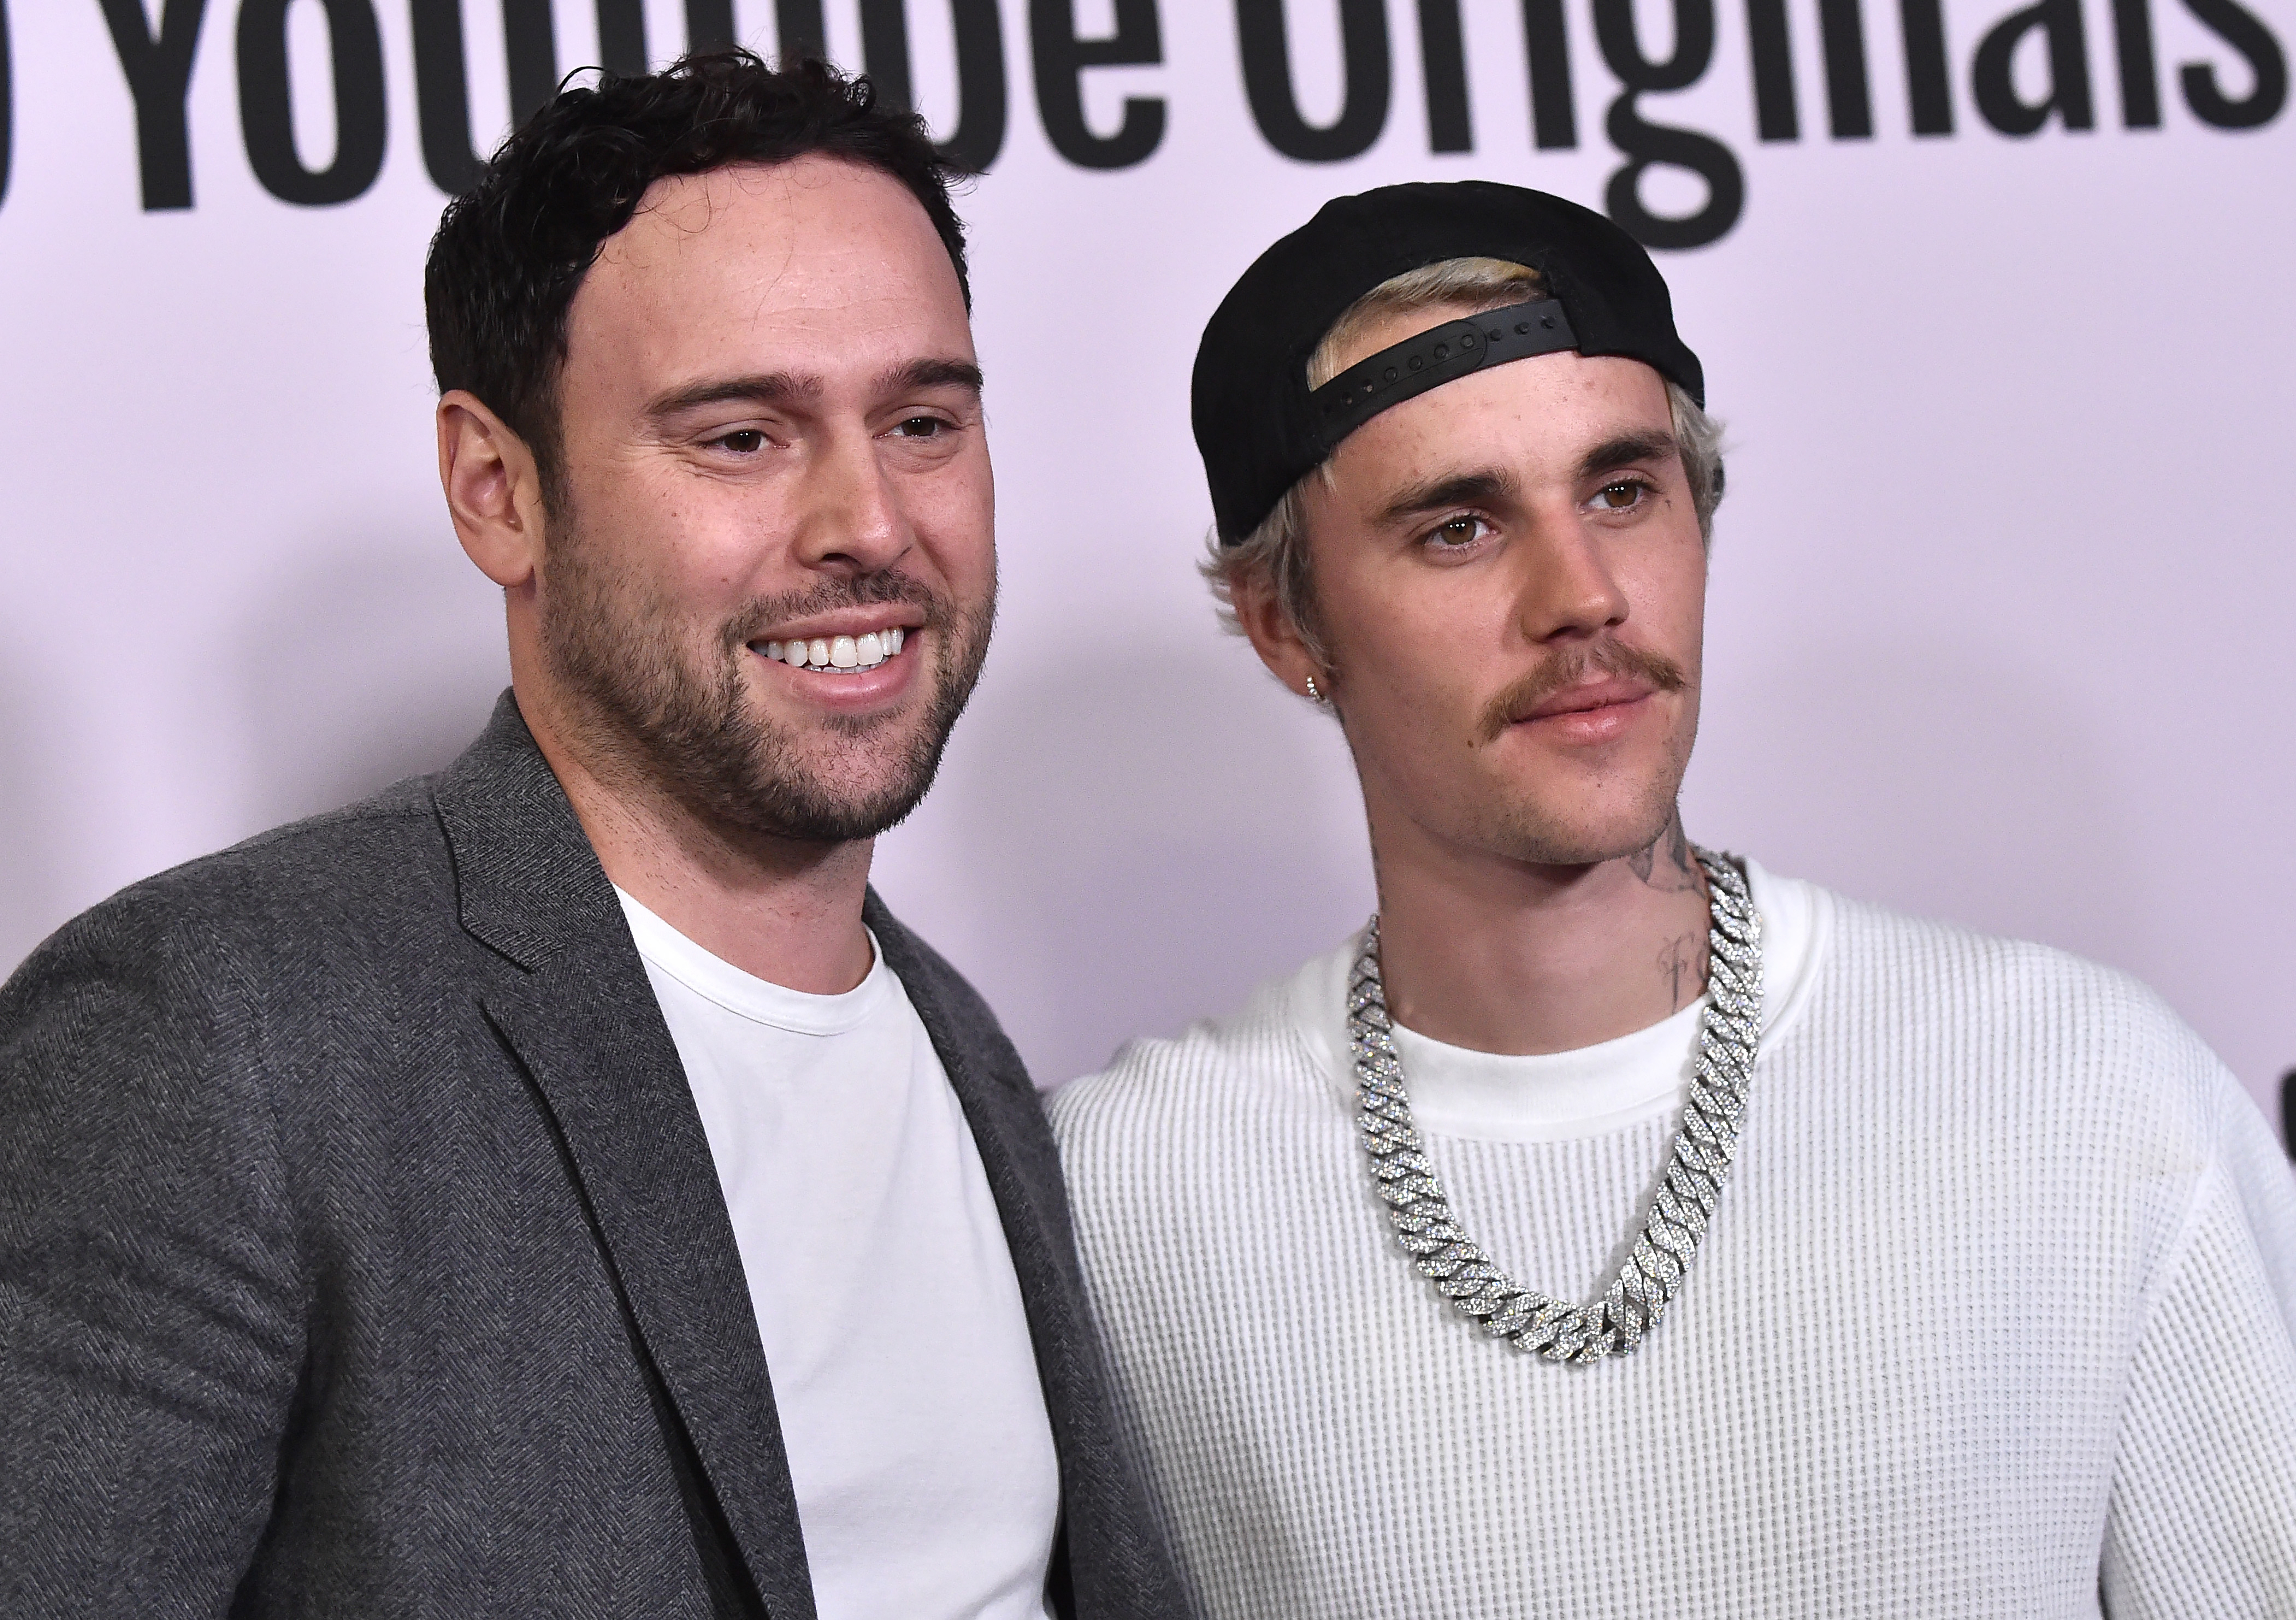 Scooter Braun and Justin Bieber smiling, Bieber in casual attire with a chain necklace